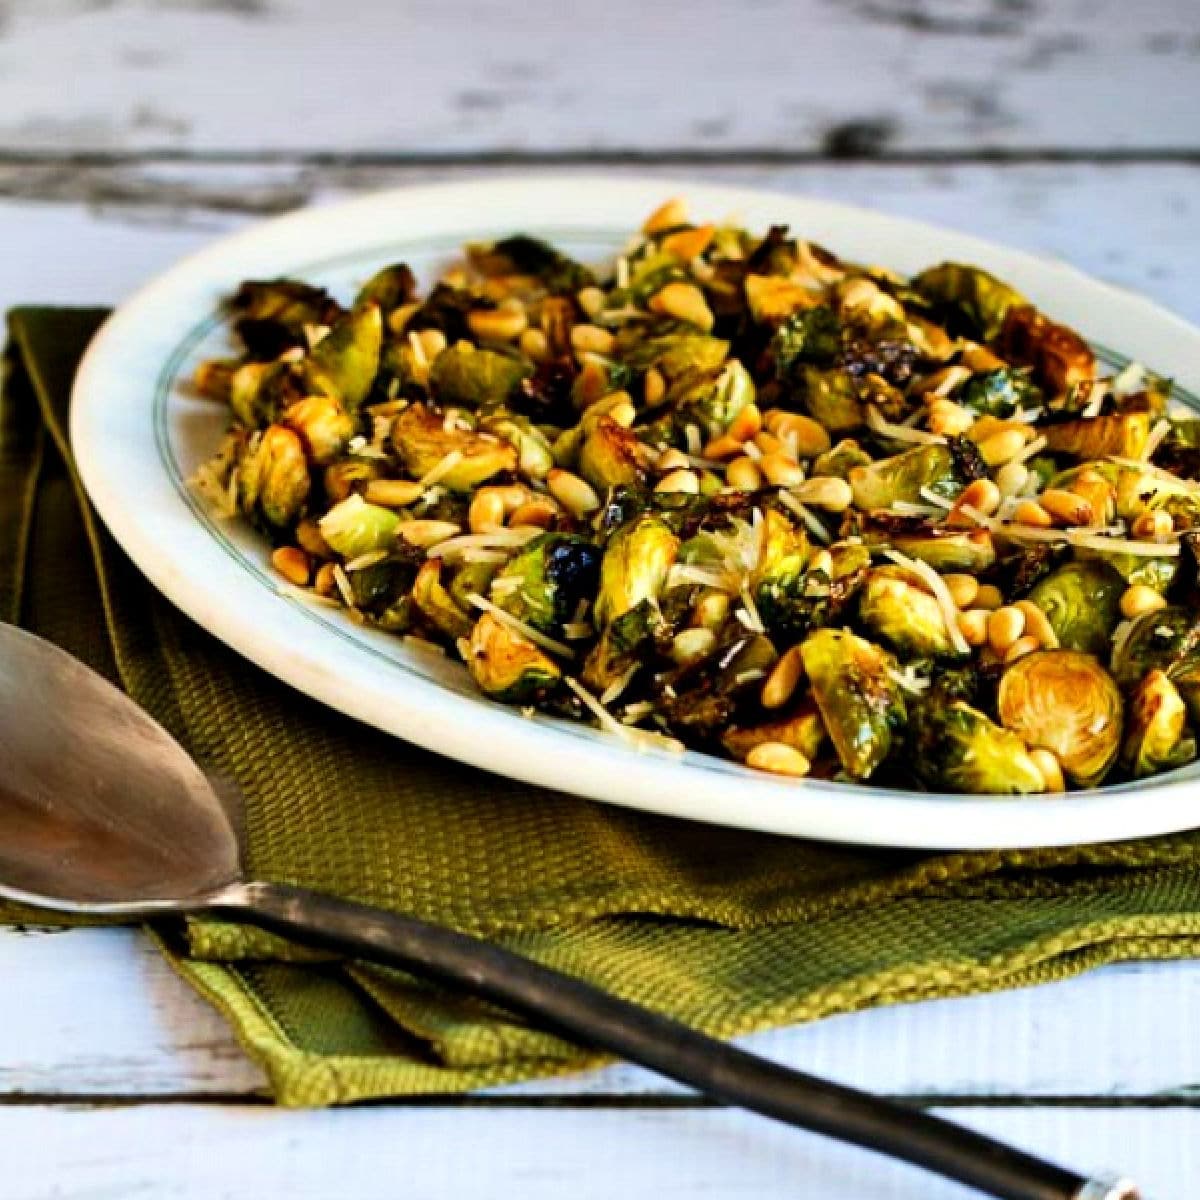 Square image for Balsamic Roasted Brussels Sprouts with Parmesan and Pine Nuts shown on serving plate with napkin and serving spoon.